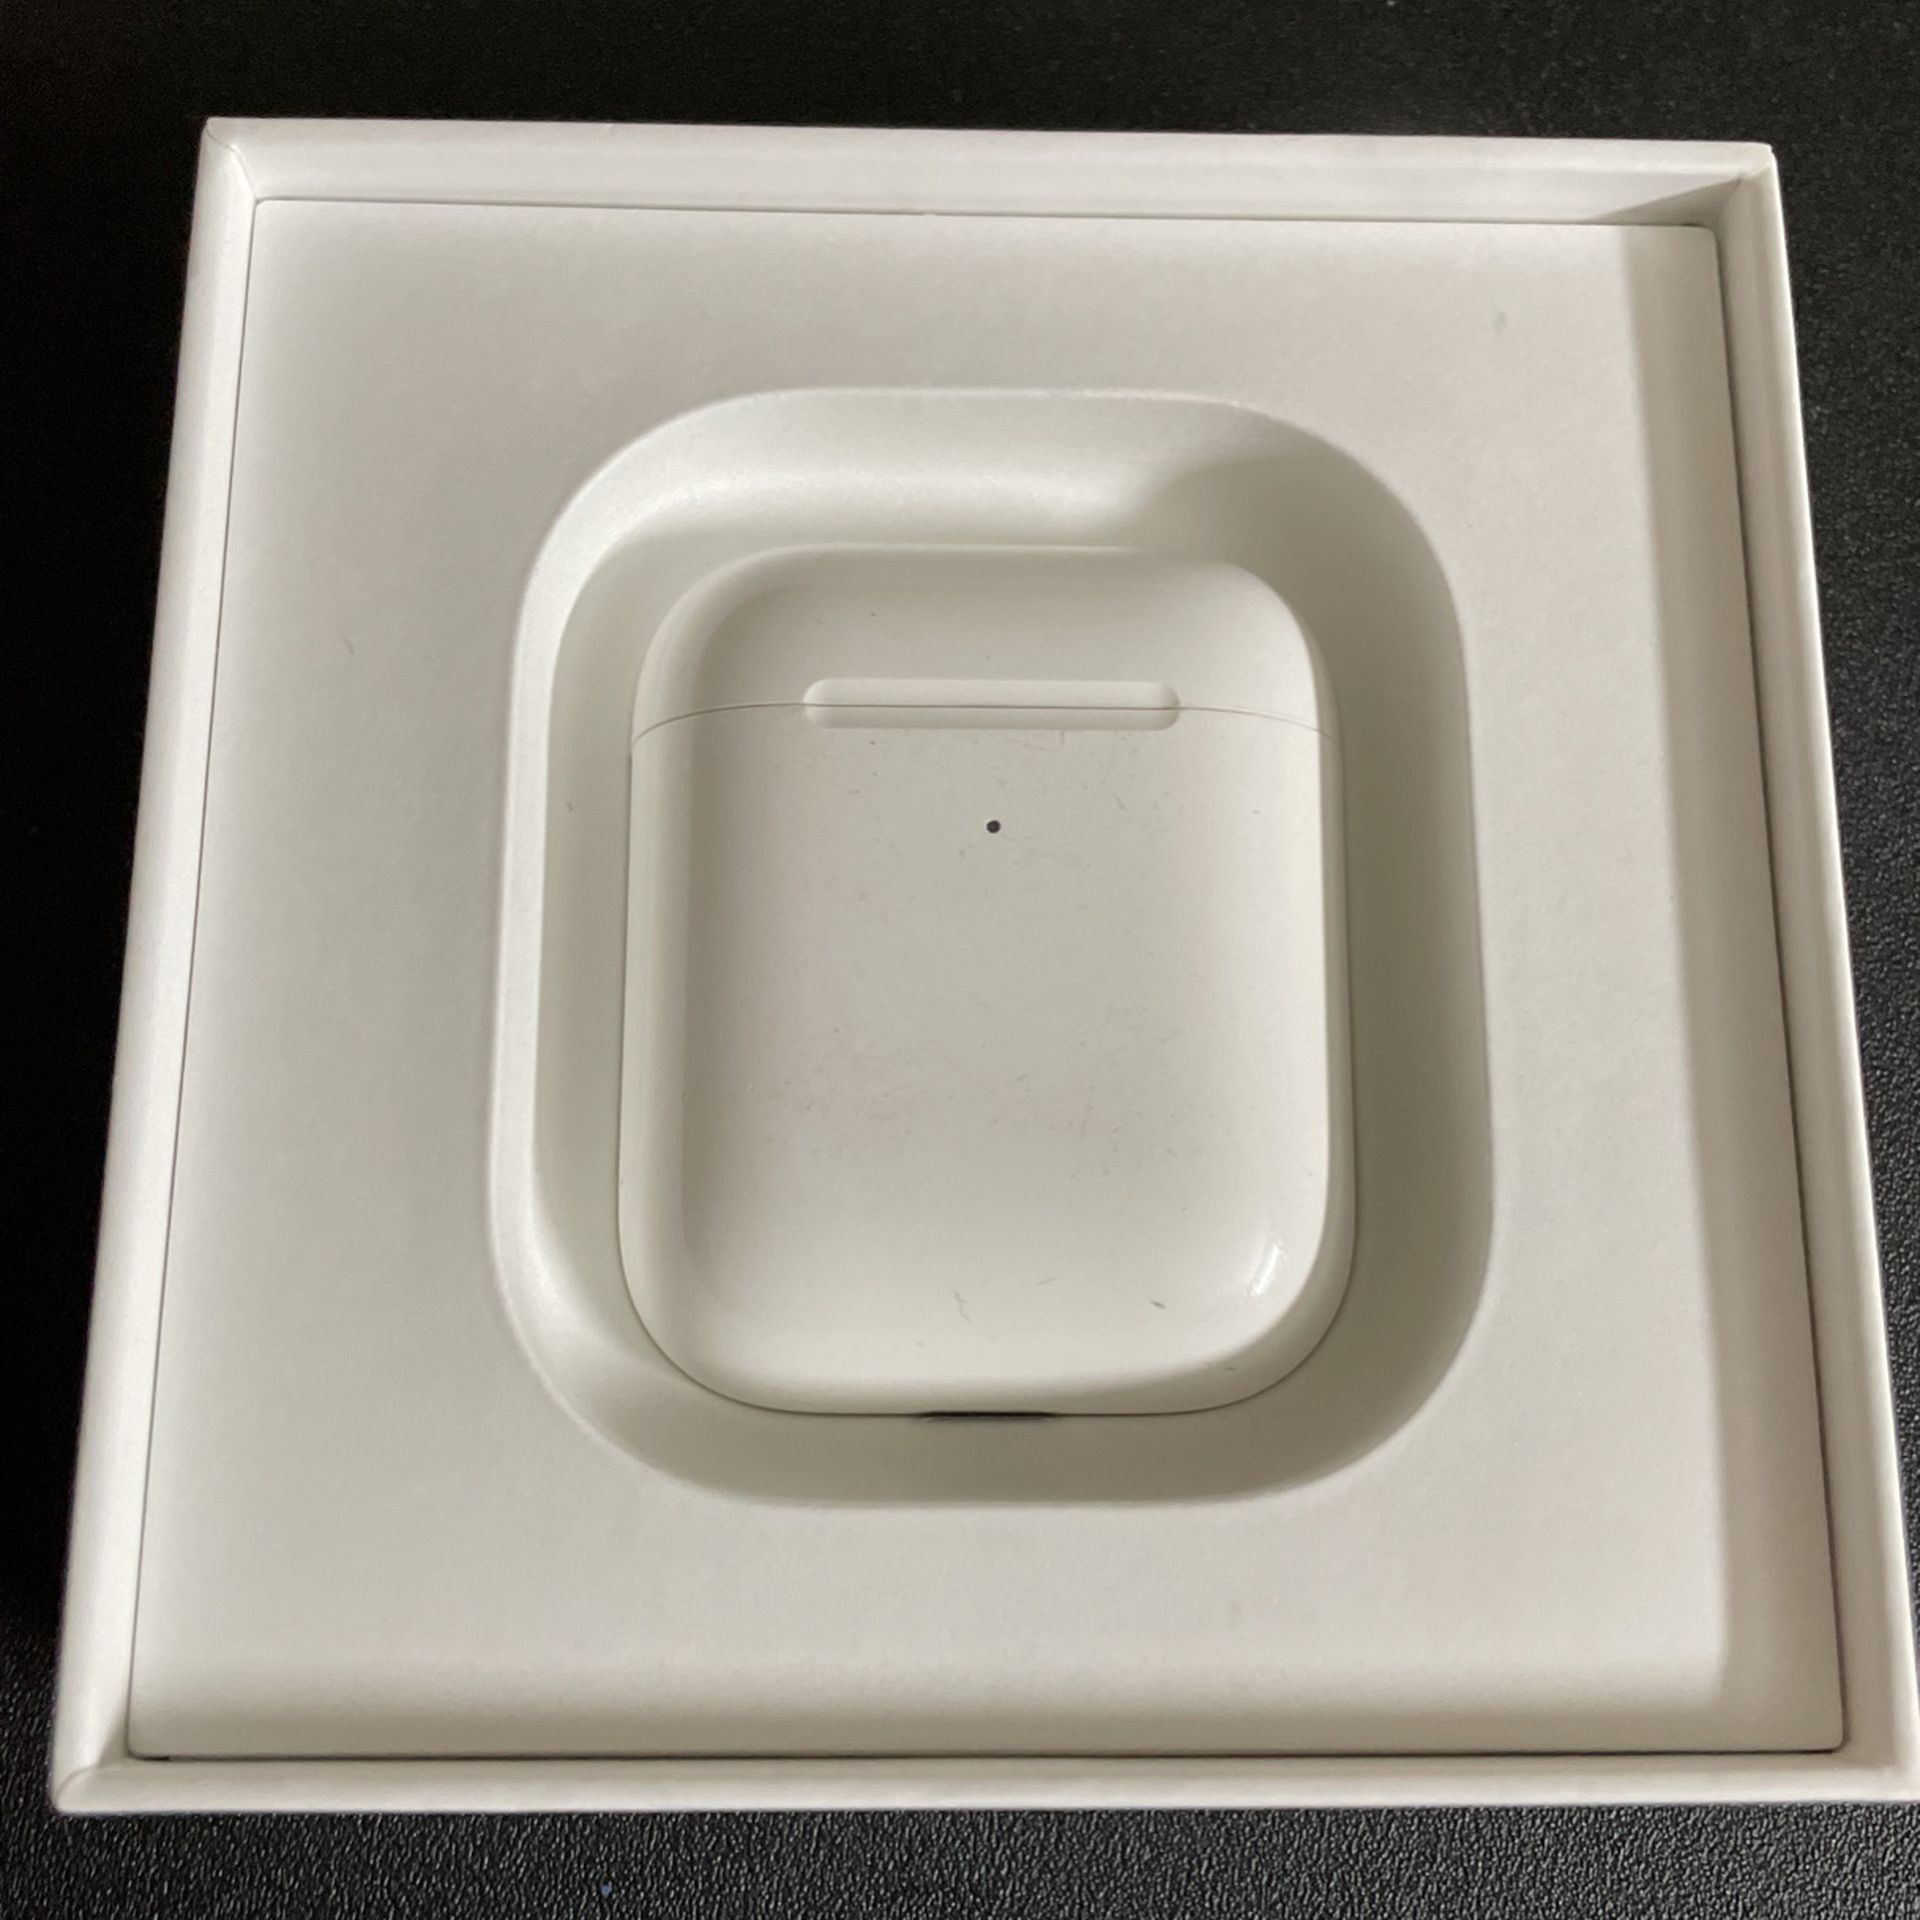 Apple AirPods 2nd Gen | Wireless Charger Case